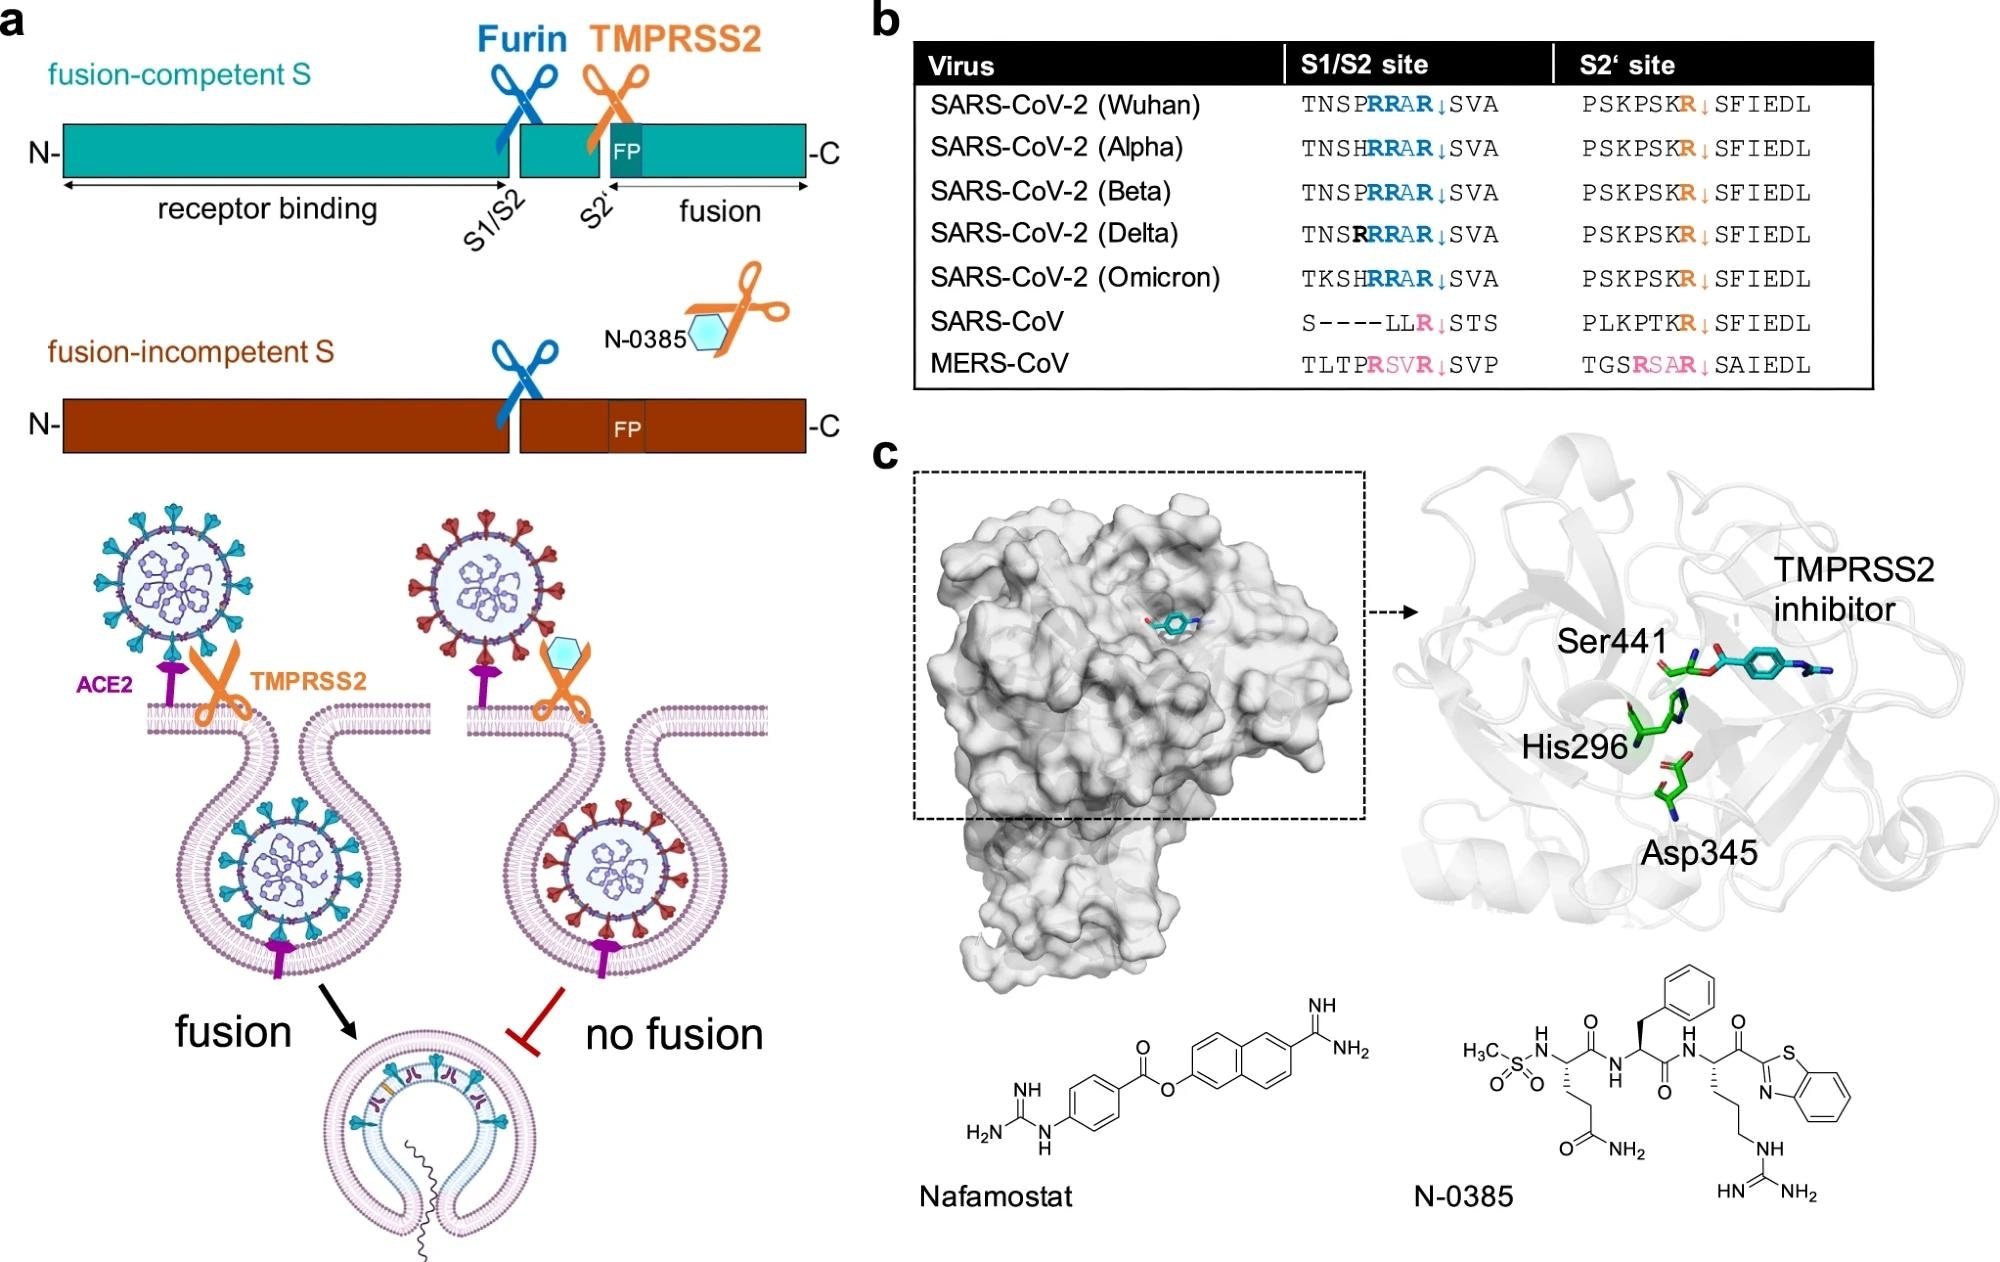 Inhibition of SARS-CoV-2 spike cleavage by TMPRSS2 inhibits virus entry. a Upper panel: Schematic representation of SARS-CoV-2 S cleavage by furin at the S1/S2 site and subsequent cleavage at the S2’ site by TMPRSS2. Cleavage at the S2’ site exposes the fusion peptide (FP), priming S for membrane fusion (cyan-colored S). Inhibition of TMPRSS2 by N-0385 (blue hexagon) causes incomplete cleavage of S (red-colored S). Lower panel: Complete cleavage of S supports membrane fusion and the release of the viral genome into the target cell. TMPRSS2 inhibition results in incomplete S cleavage and thus prevents fusion and virus entry. b Alignment of the amino acid sequences at the S1/S2 and S2‘ sites of different SARS-CoV-2 variants of concern, zoonotic SARS-CoV and MERS-CoV. Amino acid motifs highlighted in blue and orange are cleaved by furin and TMPRSS2, respectively. Motifs highlighted in pink are most likely cleaved by TMPRSS2. c Crystal structure of human TMPRSS2 (SRCR and serine protease domain) in complex with nafamostat (cyan, PDB: 7MEQ; upper left panel). Catalytic domain (cartoon style) of TMPRSS2 (upper right panel). The catalytic triad (green stick model) and nafamostat (cyan) are indicated. Structures of nafamostat (PubChem CID 4413) and N-0385 (PubChem CID 135169285, lower panels)